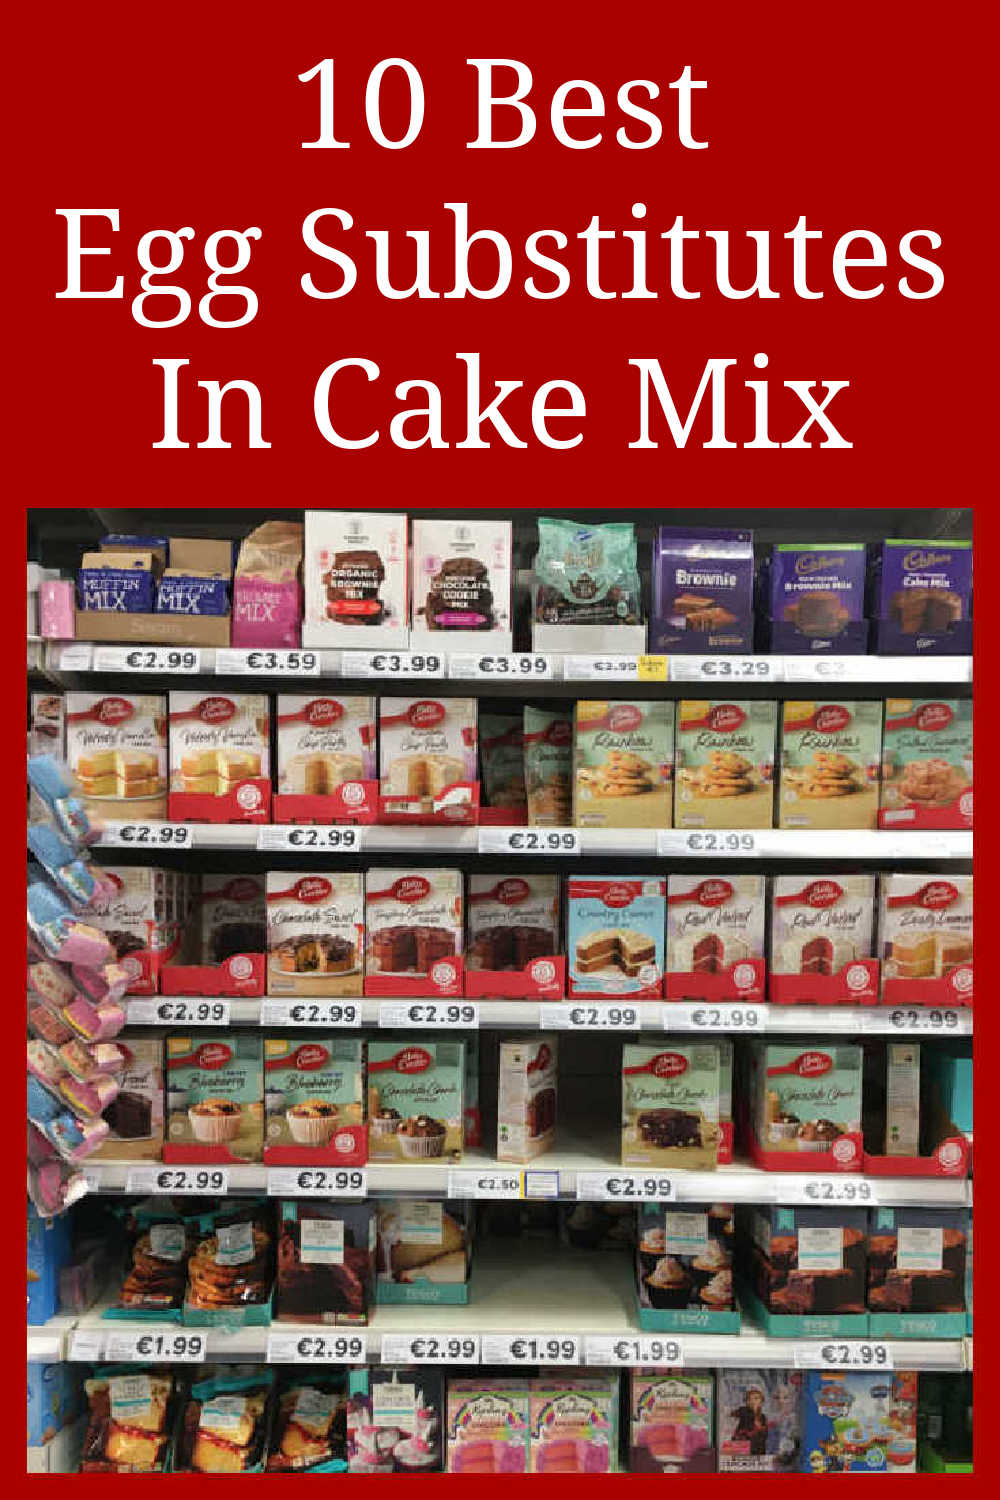 10 Best Substitute For Eggs In Cake Mix Ideas – Easy alternatives and substitutes for eggs in baking and enjoy a perfectly moist cake.